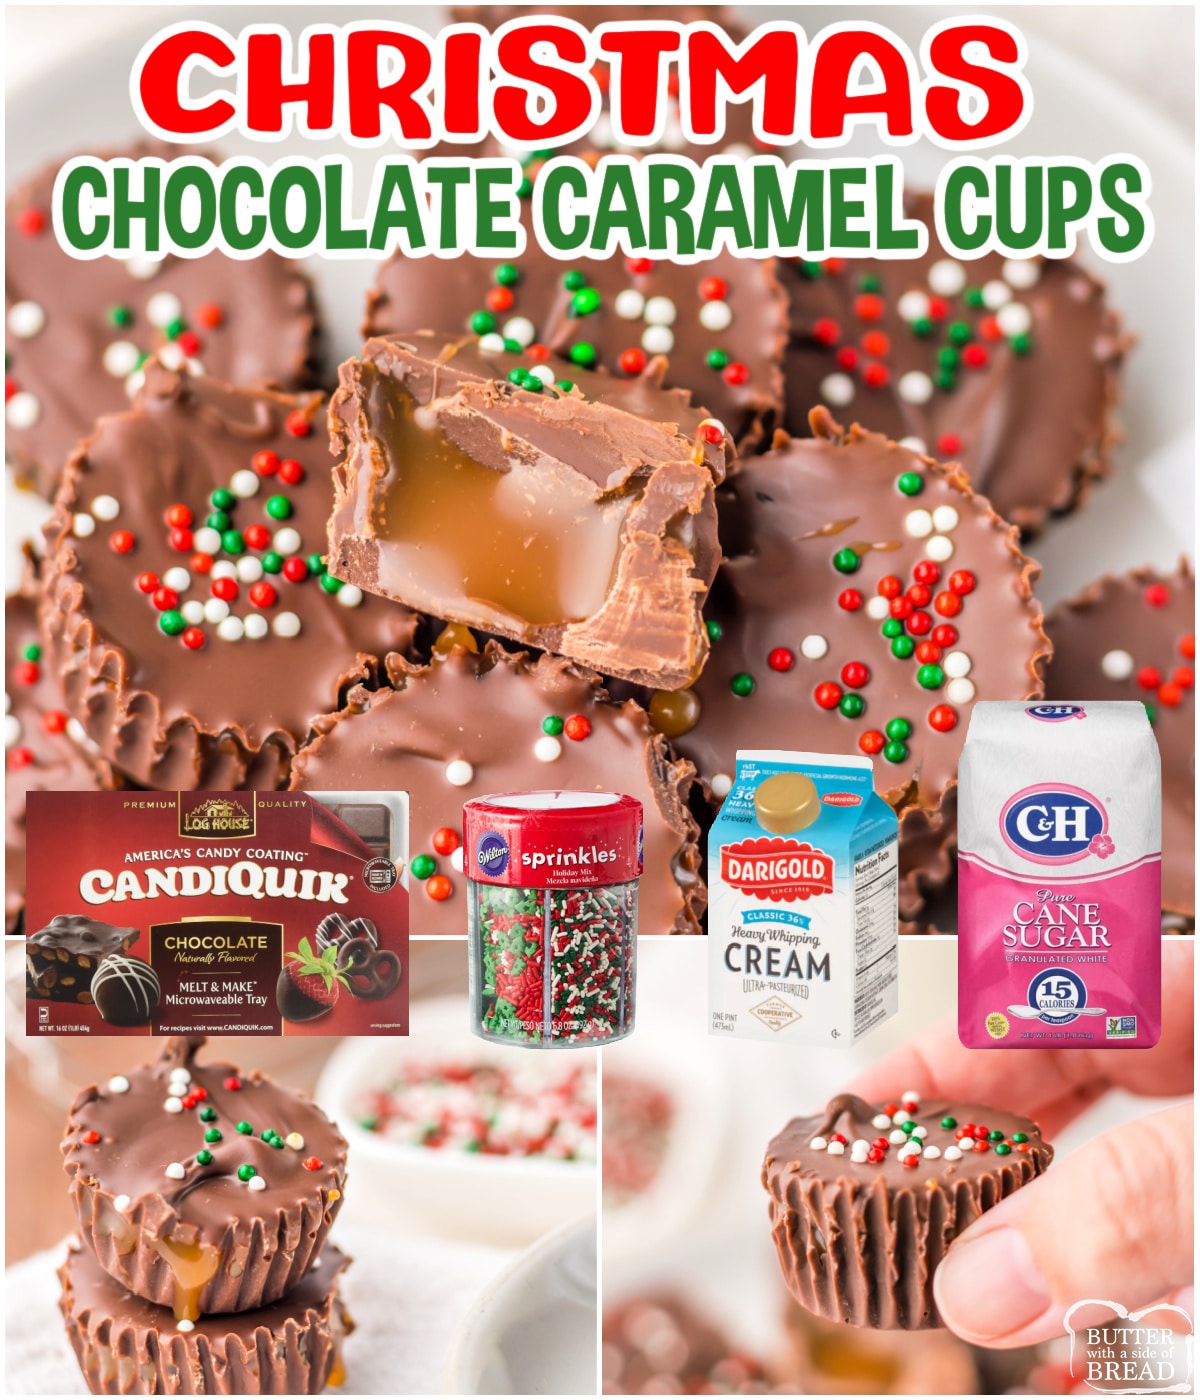 Christmas Chocolate Caramel Cups are the perfect gift or holiday treat for the season. Only 4 ingredients needed to make this easy candy recipe.